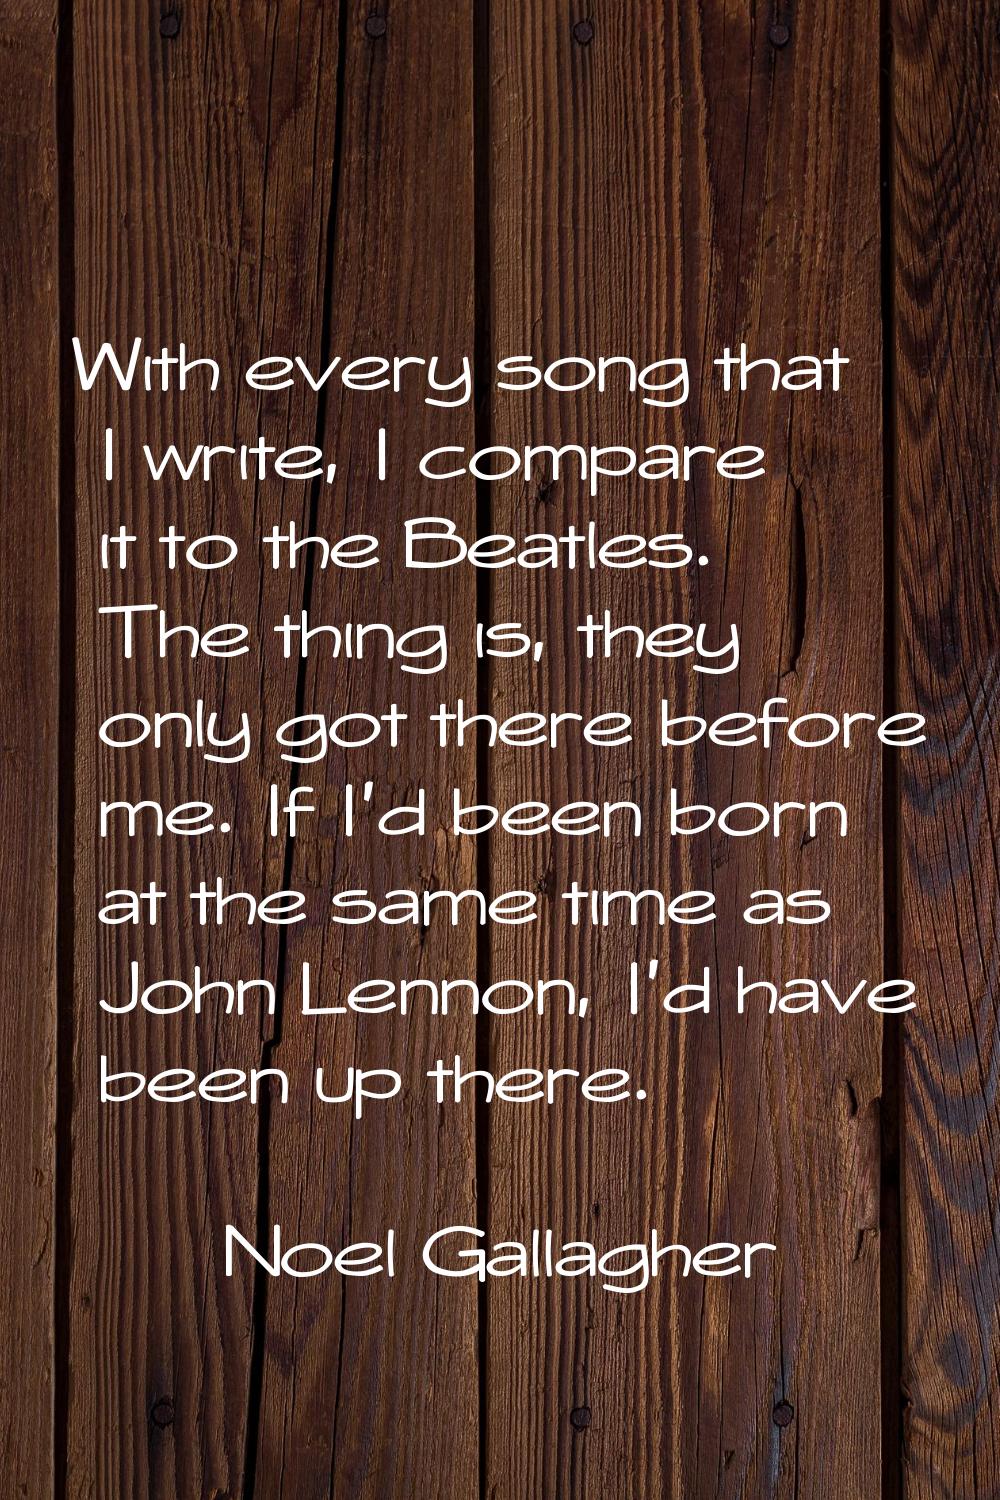 With every song that I write, I compare it to the Beatles. The thing is, they only got there before